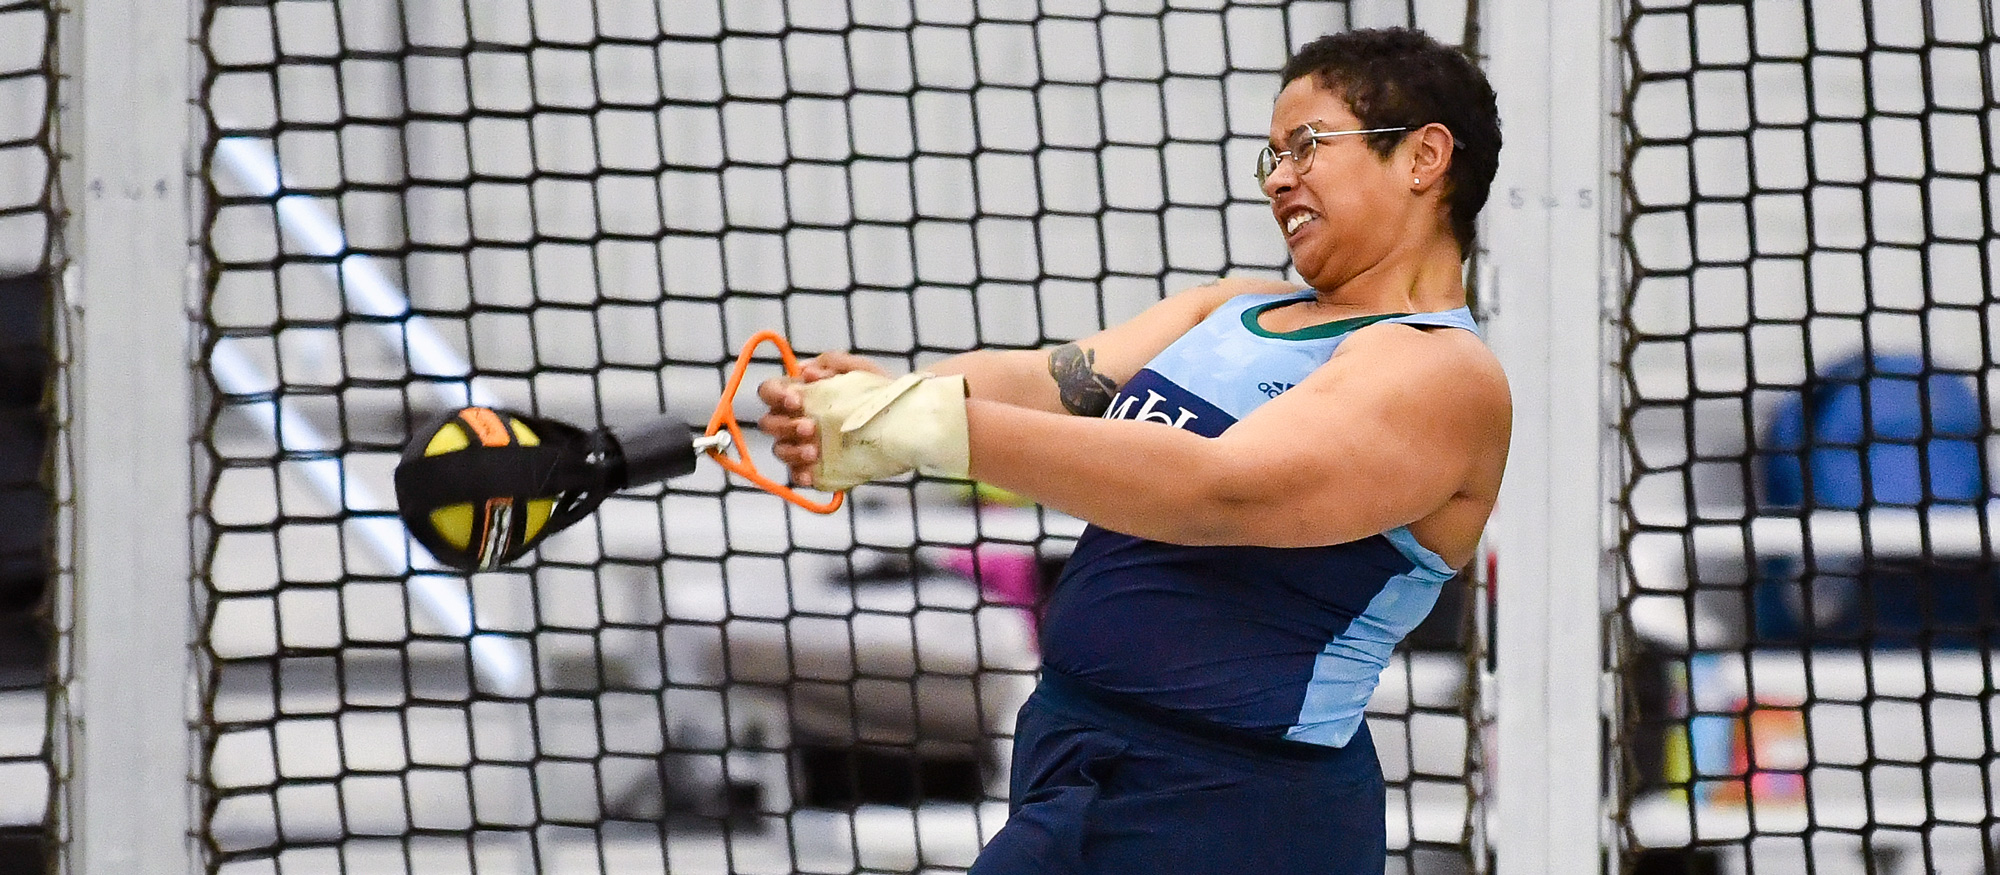 Lize Brown took second place in the shot put and fourth in the weight throw at the first Mount Holyoke-Smith-Wellesley Tri-Meet, held Feb. 18, 2023 at Smith College. (RJB Sports file photo)